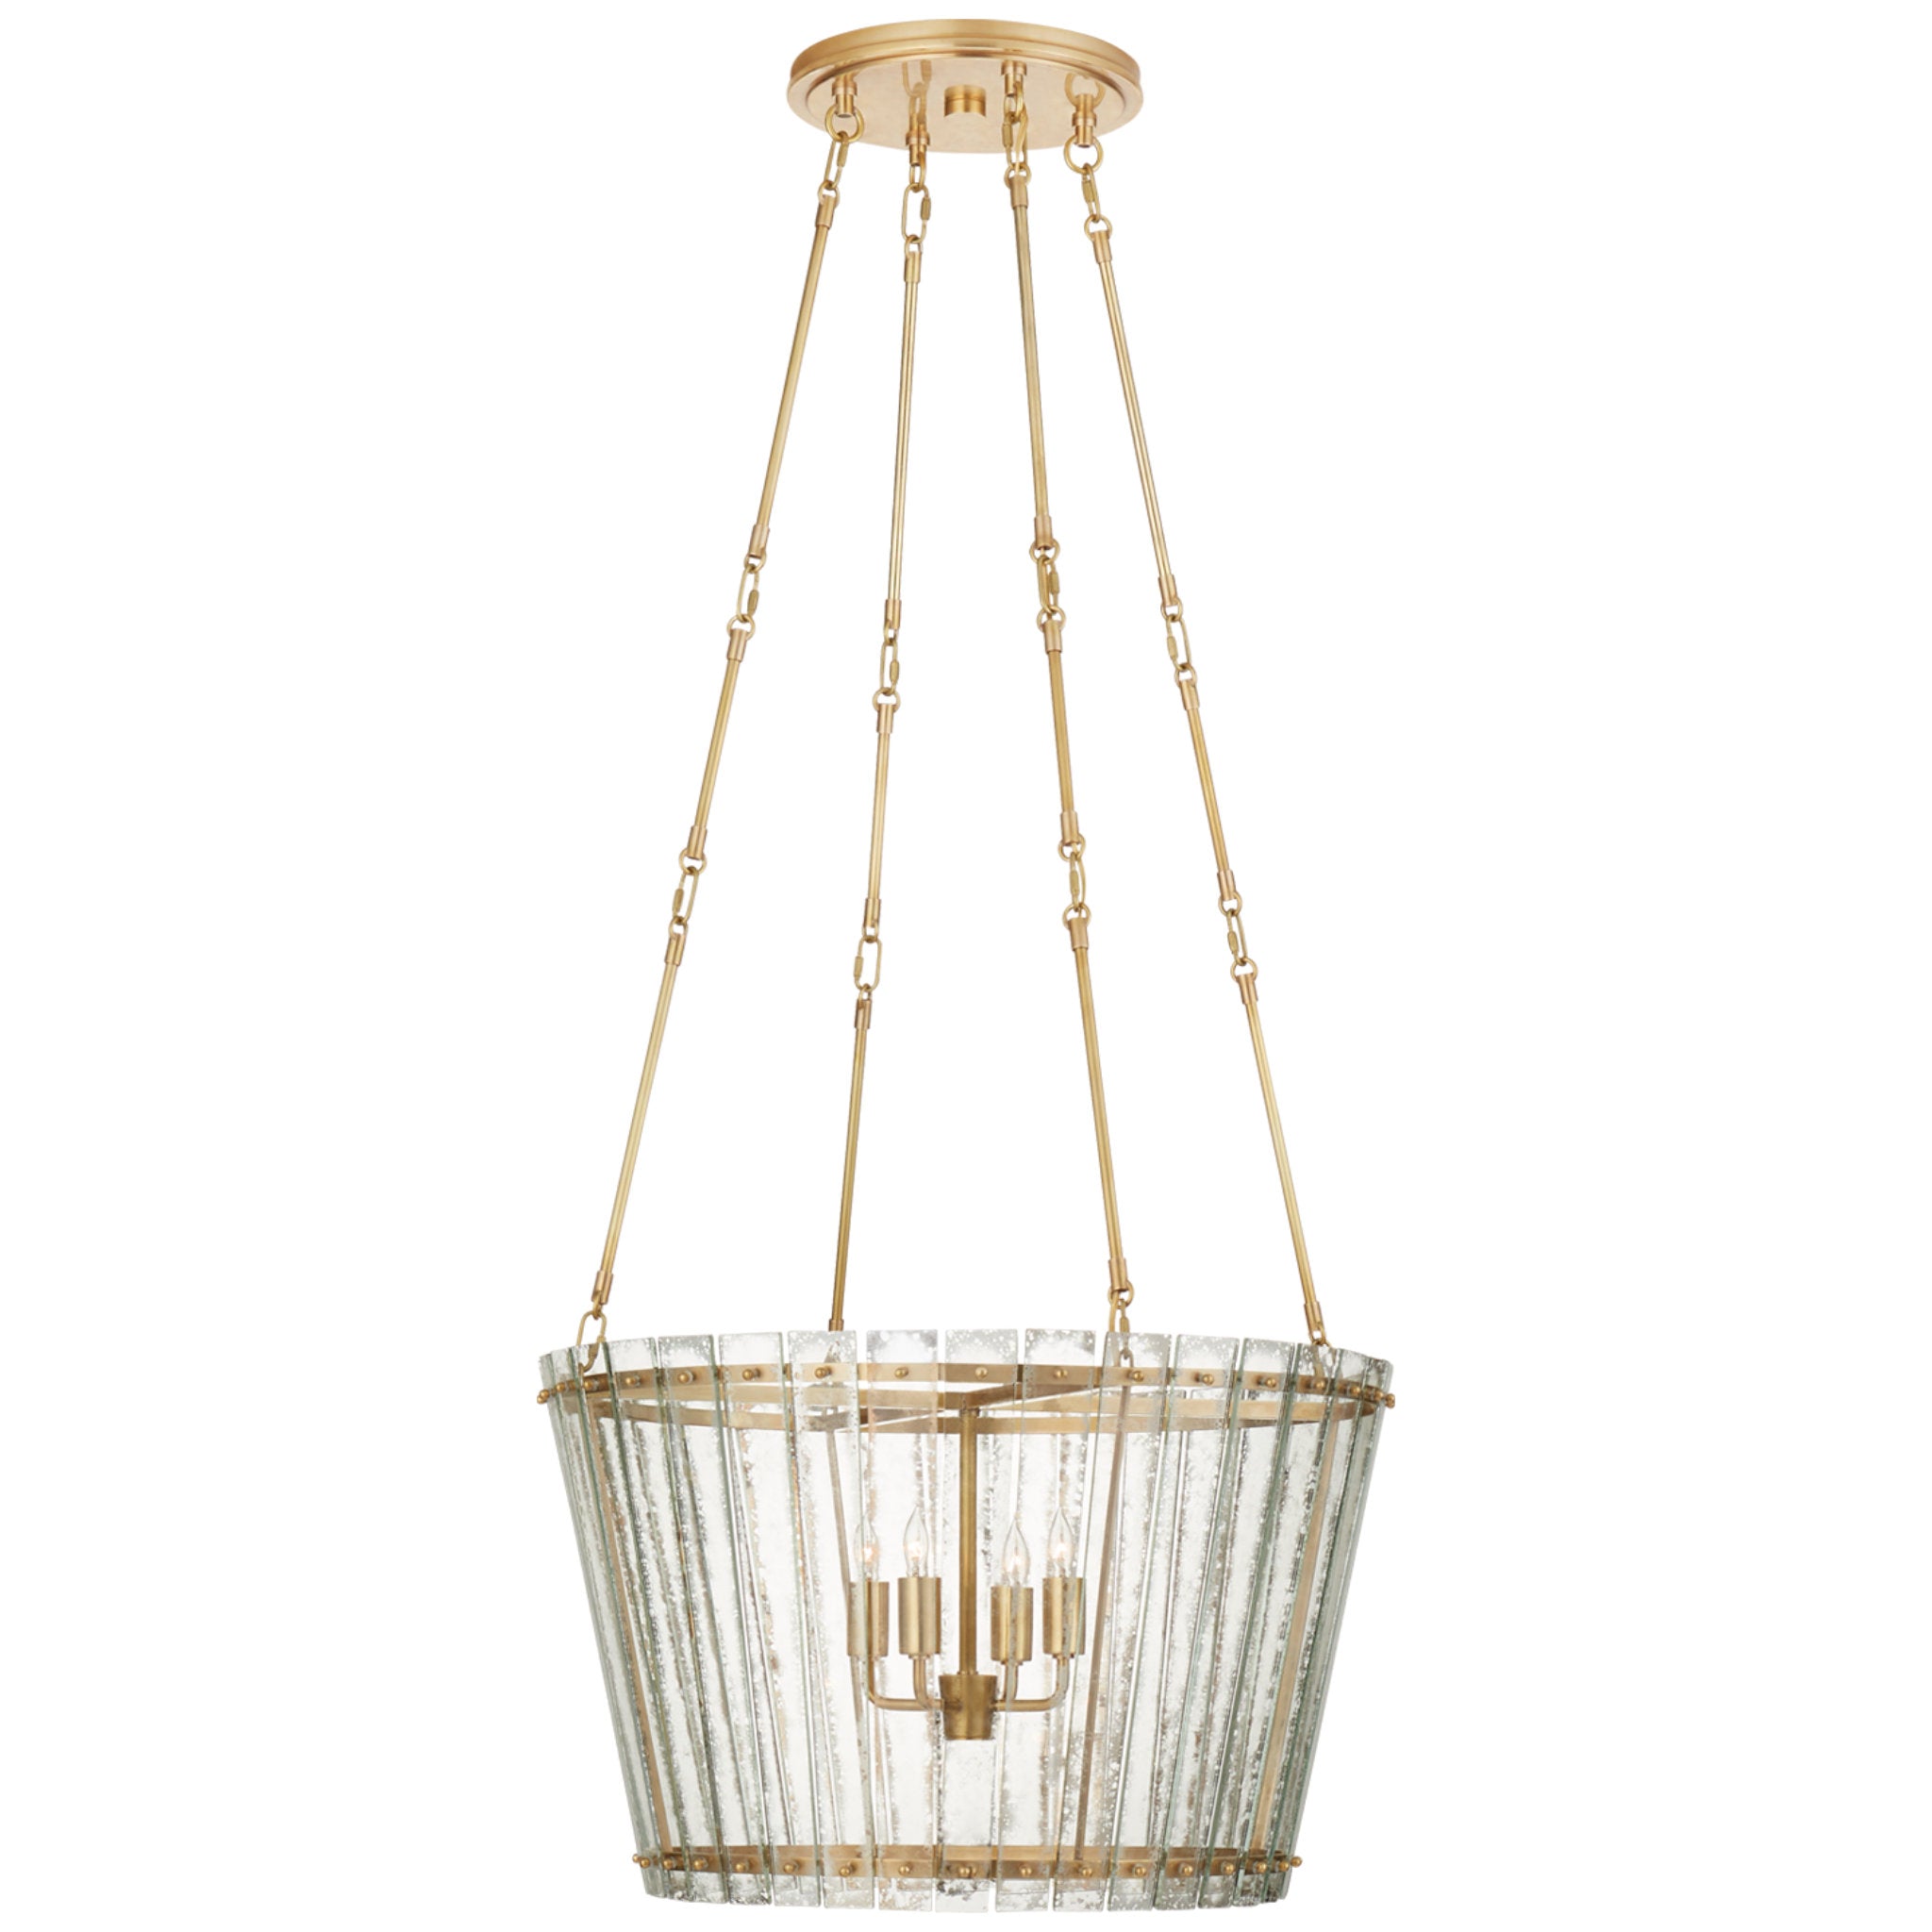 Carrier and Company Cadence Medium Chandelier in Hand-Rubbed Antique Brass with Antique Mirror